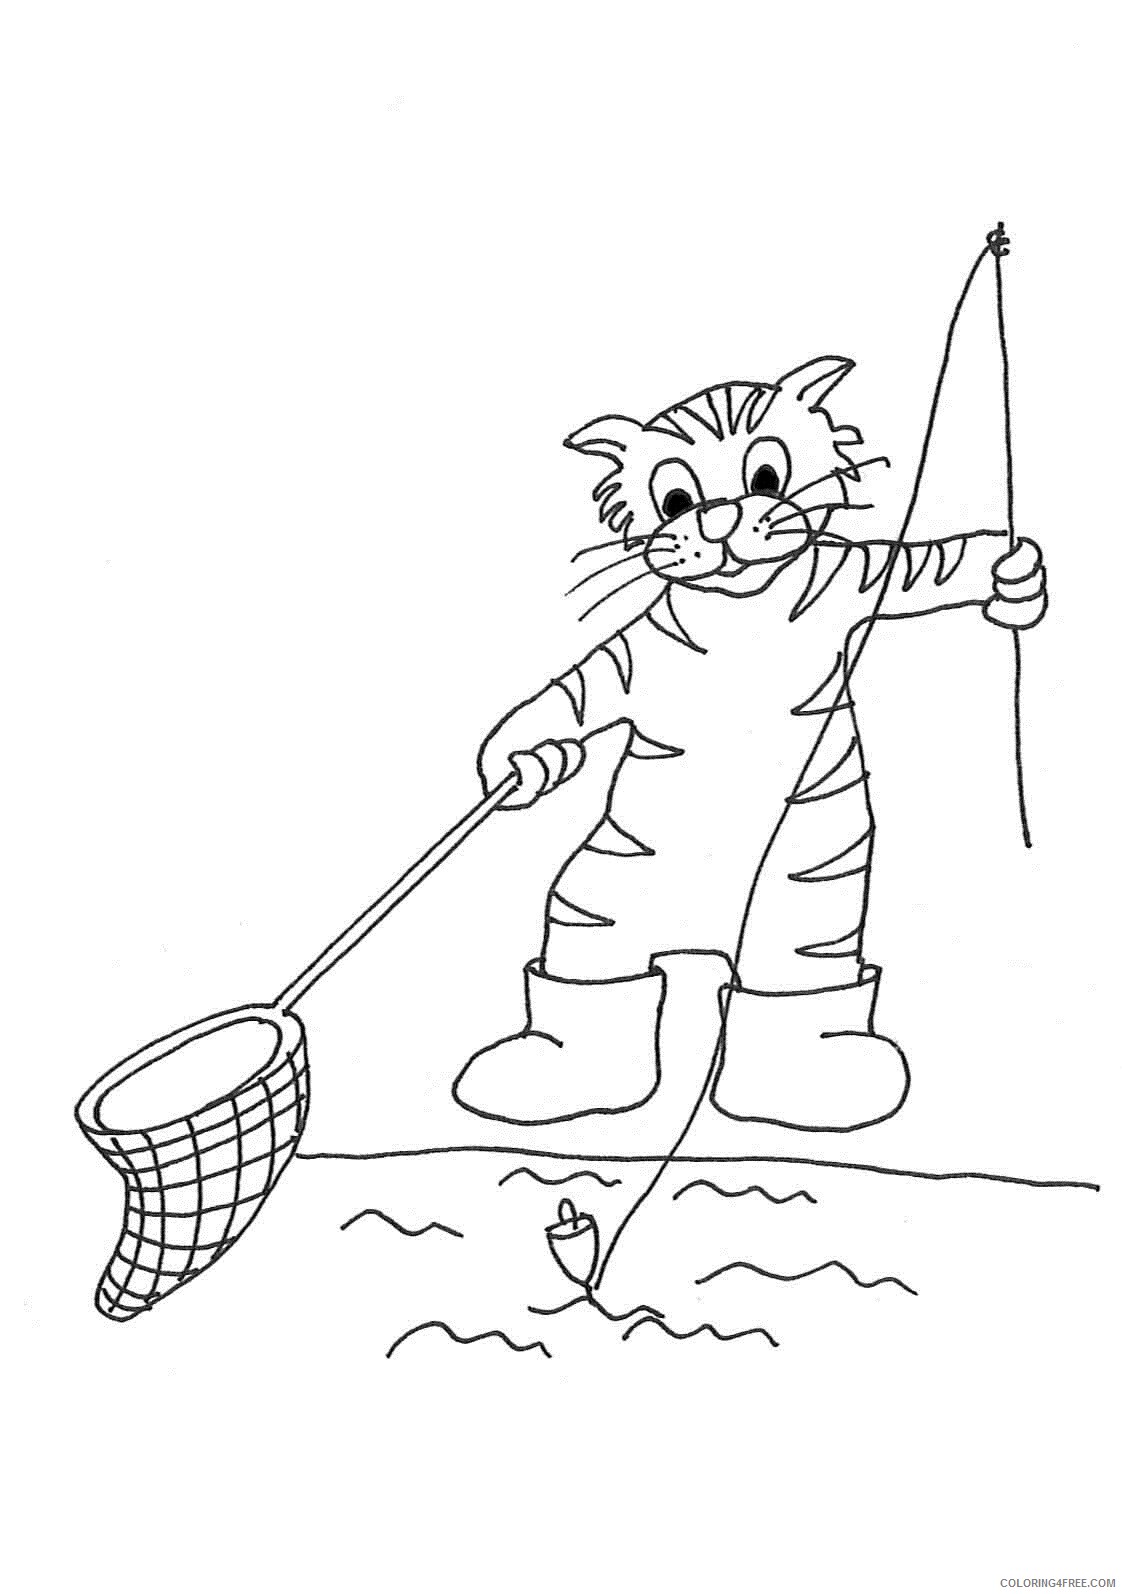 Cat Coloring Pages Animal Printable Sheets of Cats 2021 0841 Coloring4free